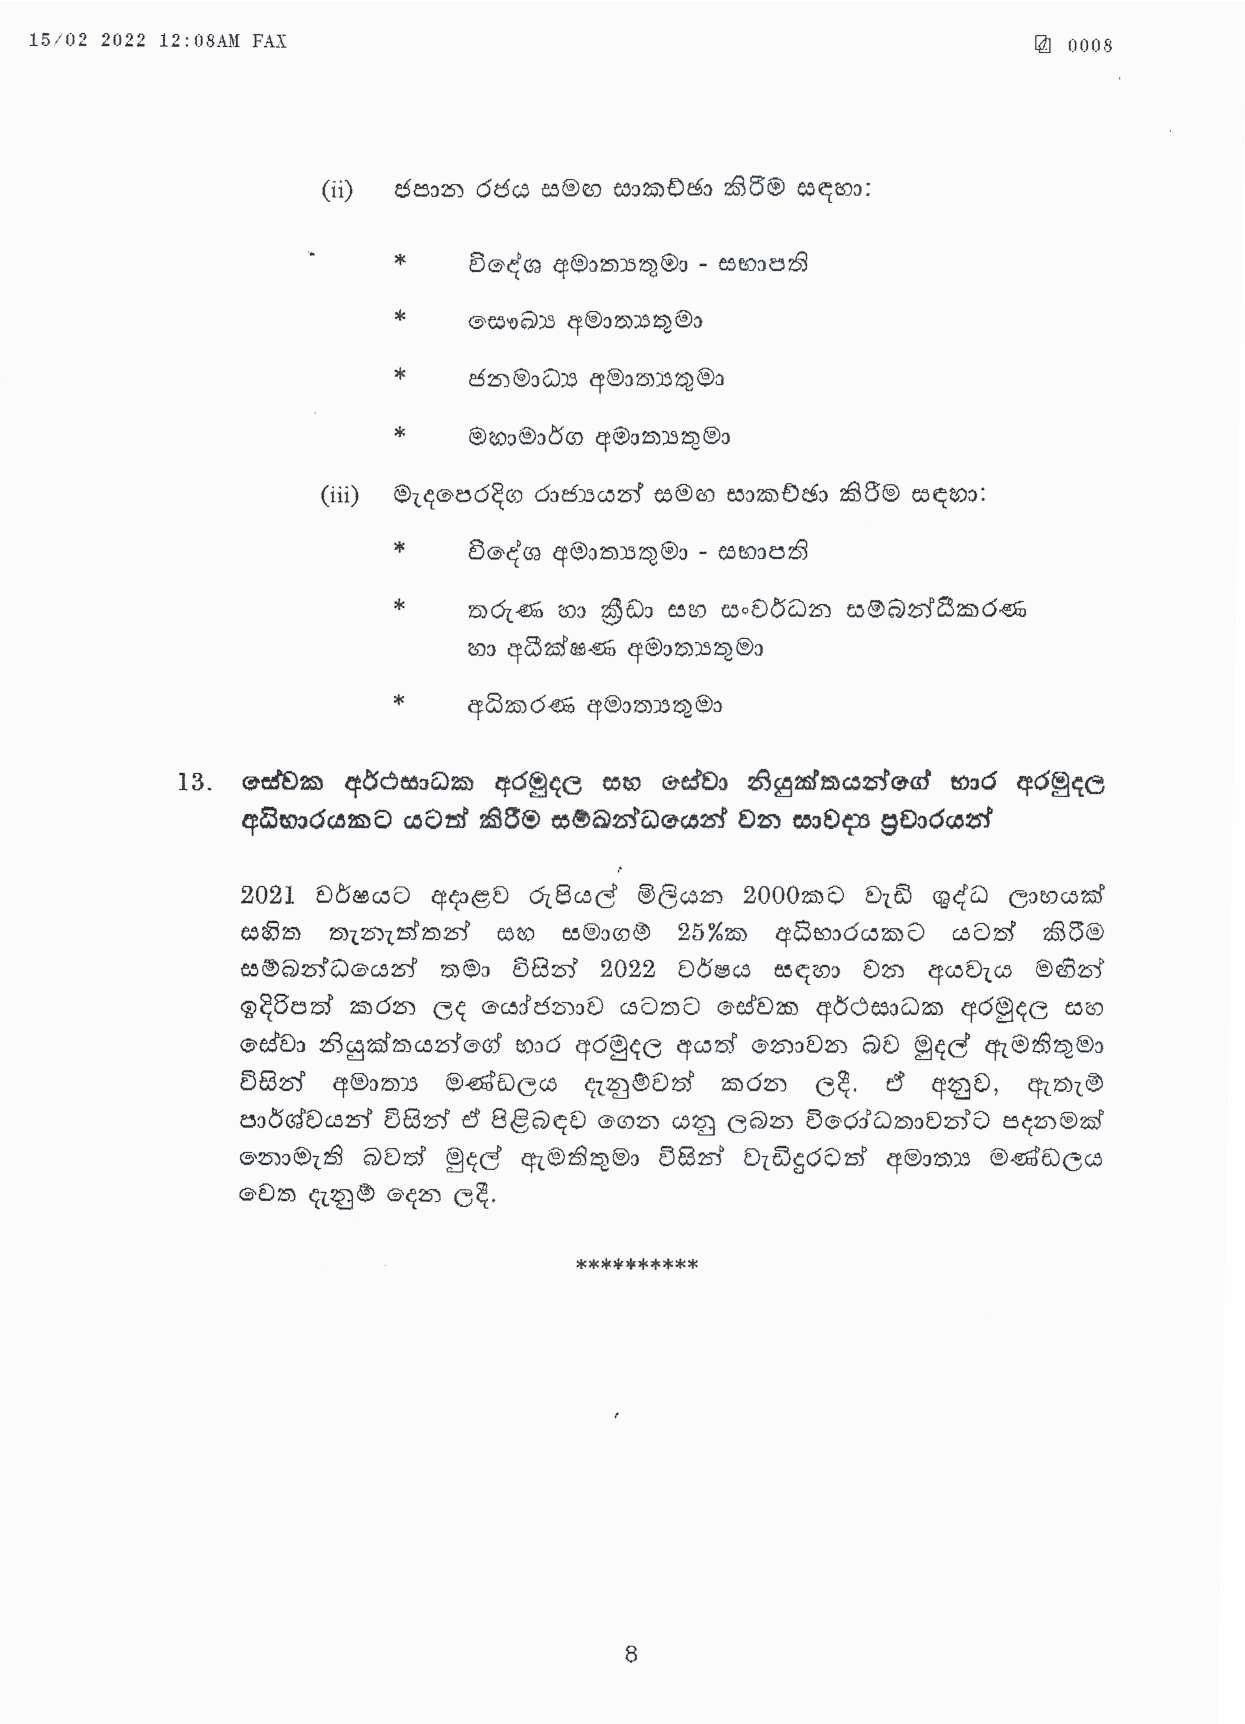 Cabinet Decision on 14.02.2022 page 008